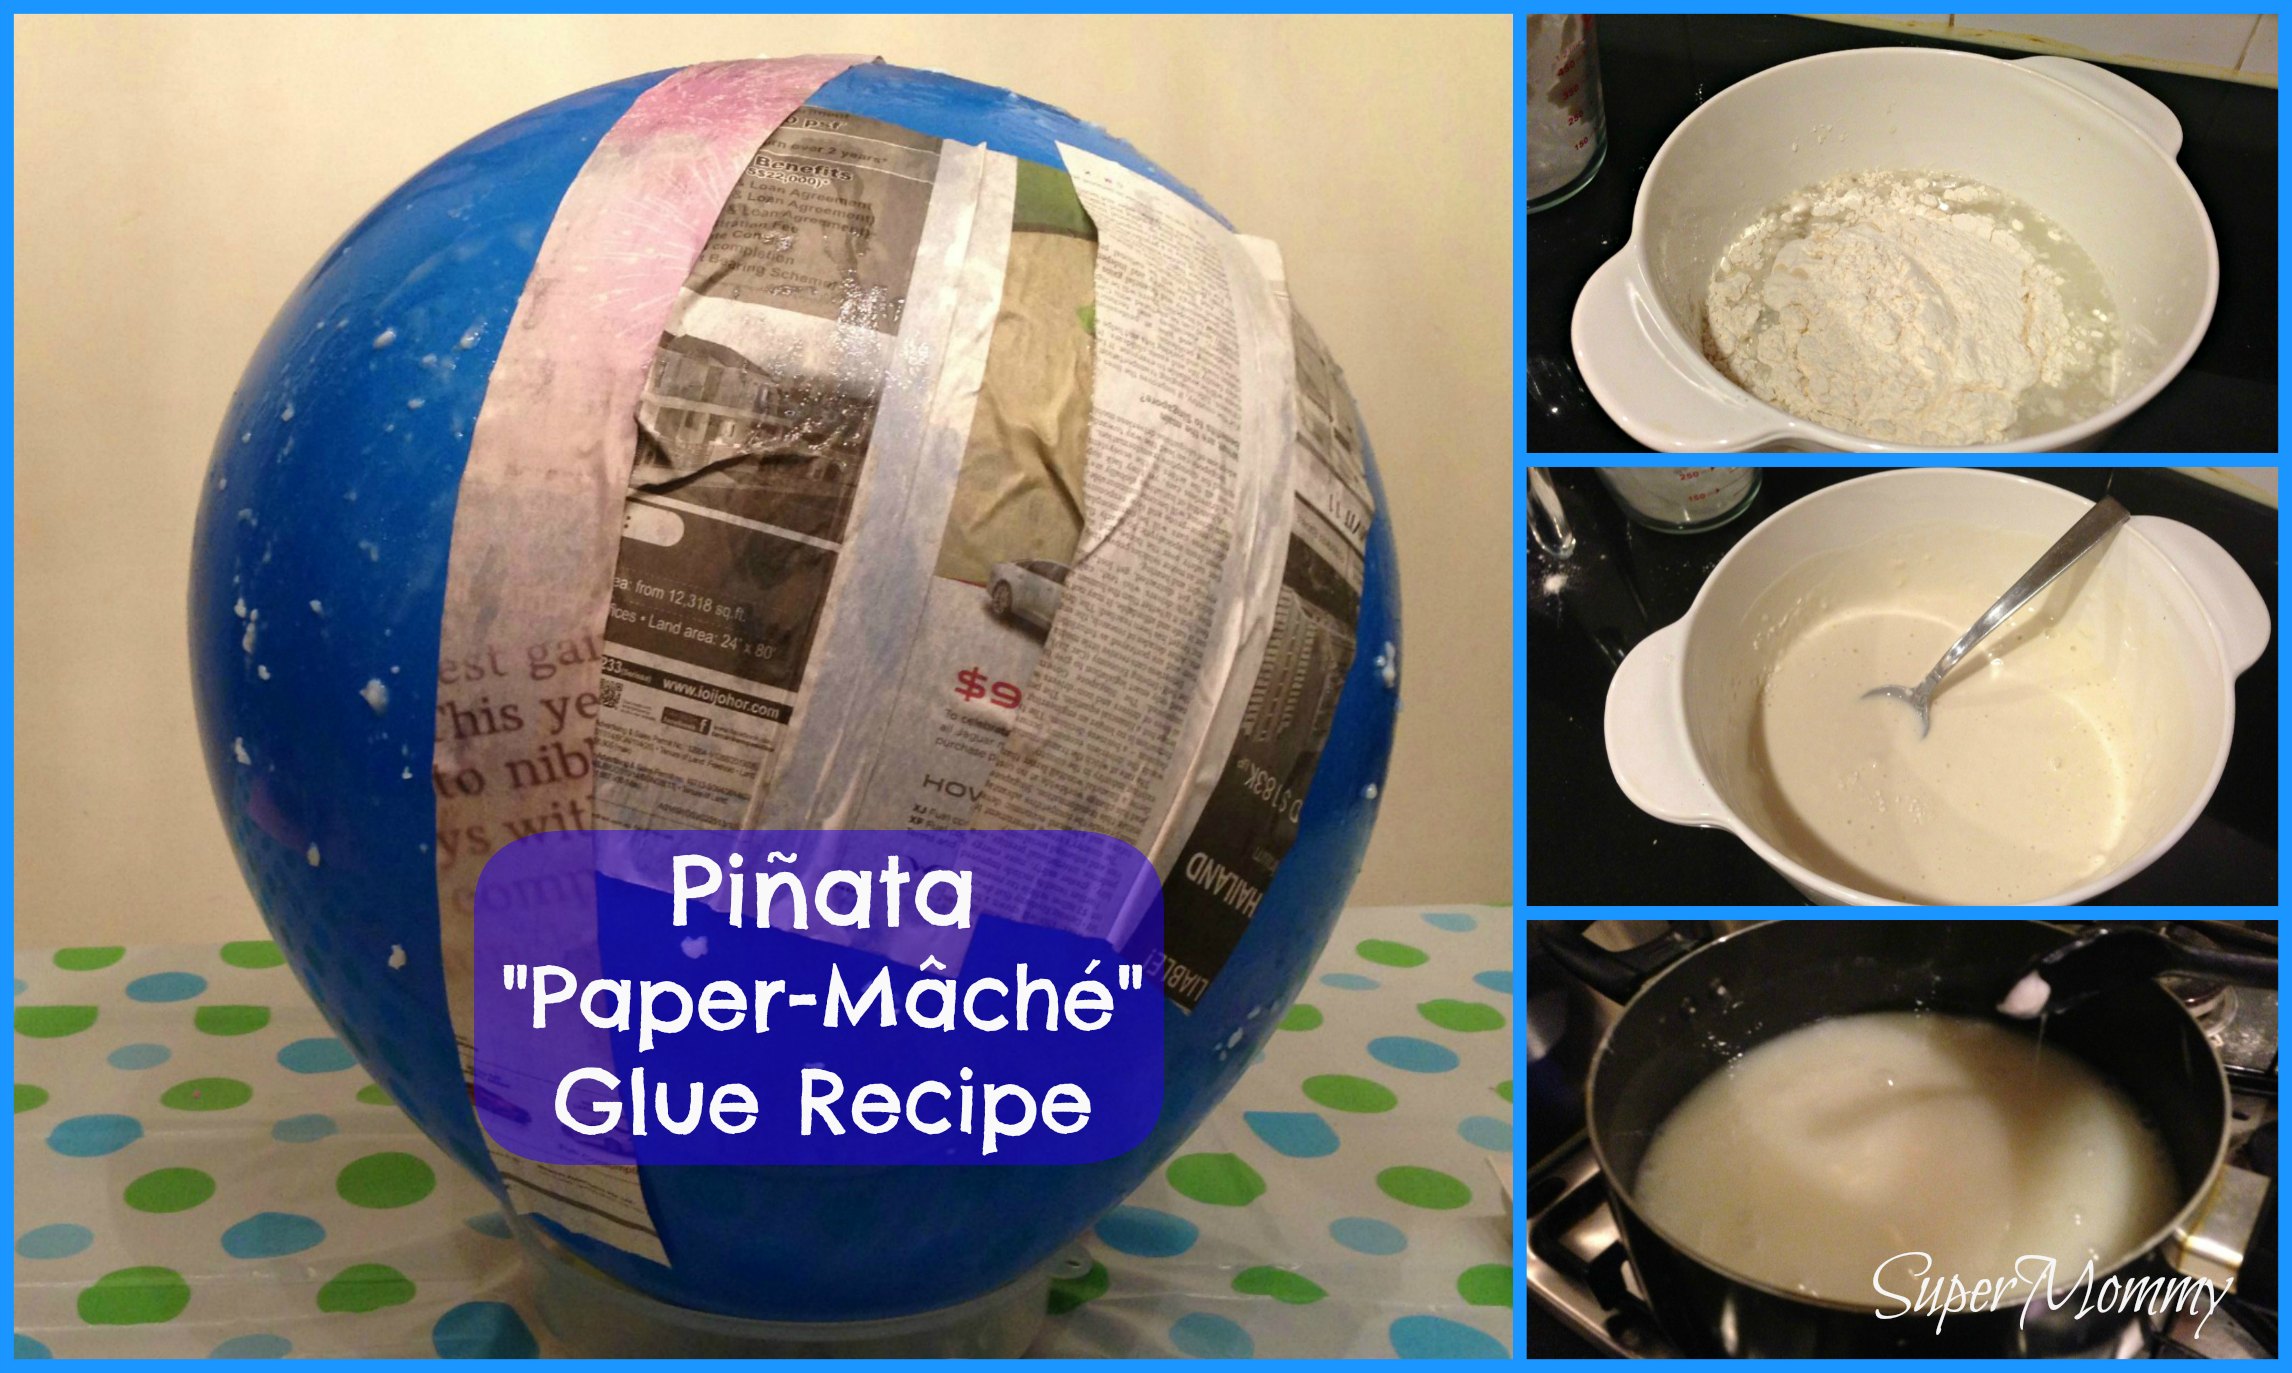 Making The Paste Glue For Your Paper Mache Pinata Is Really Easy And